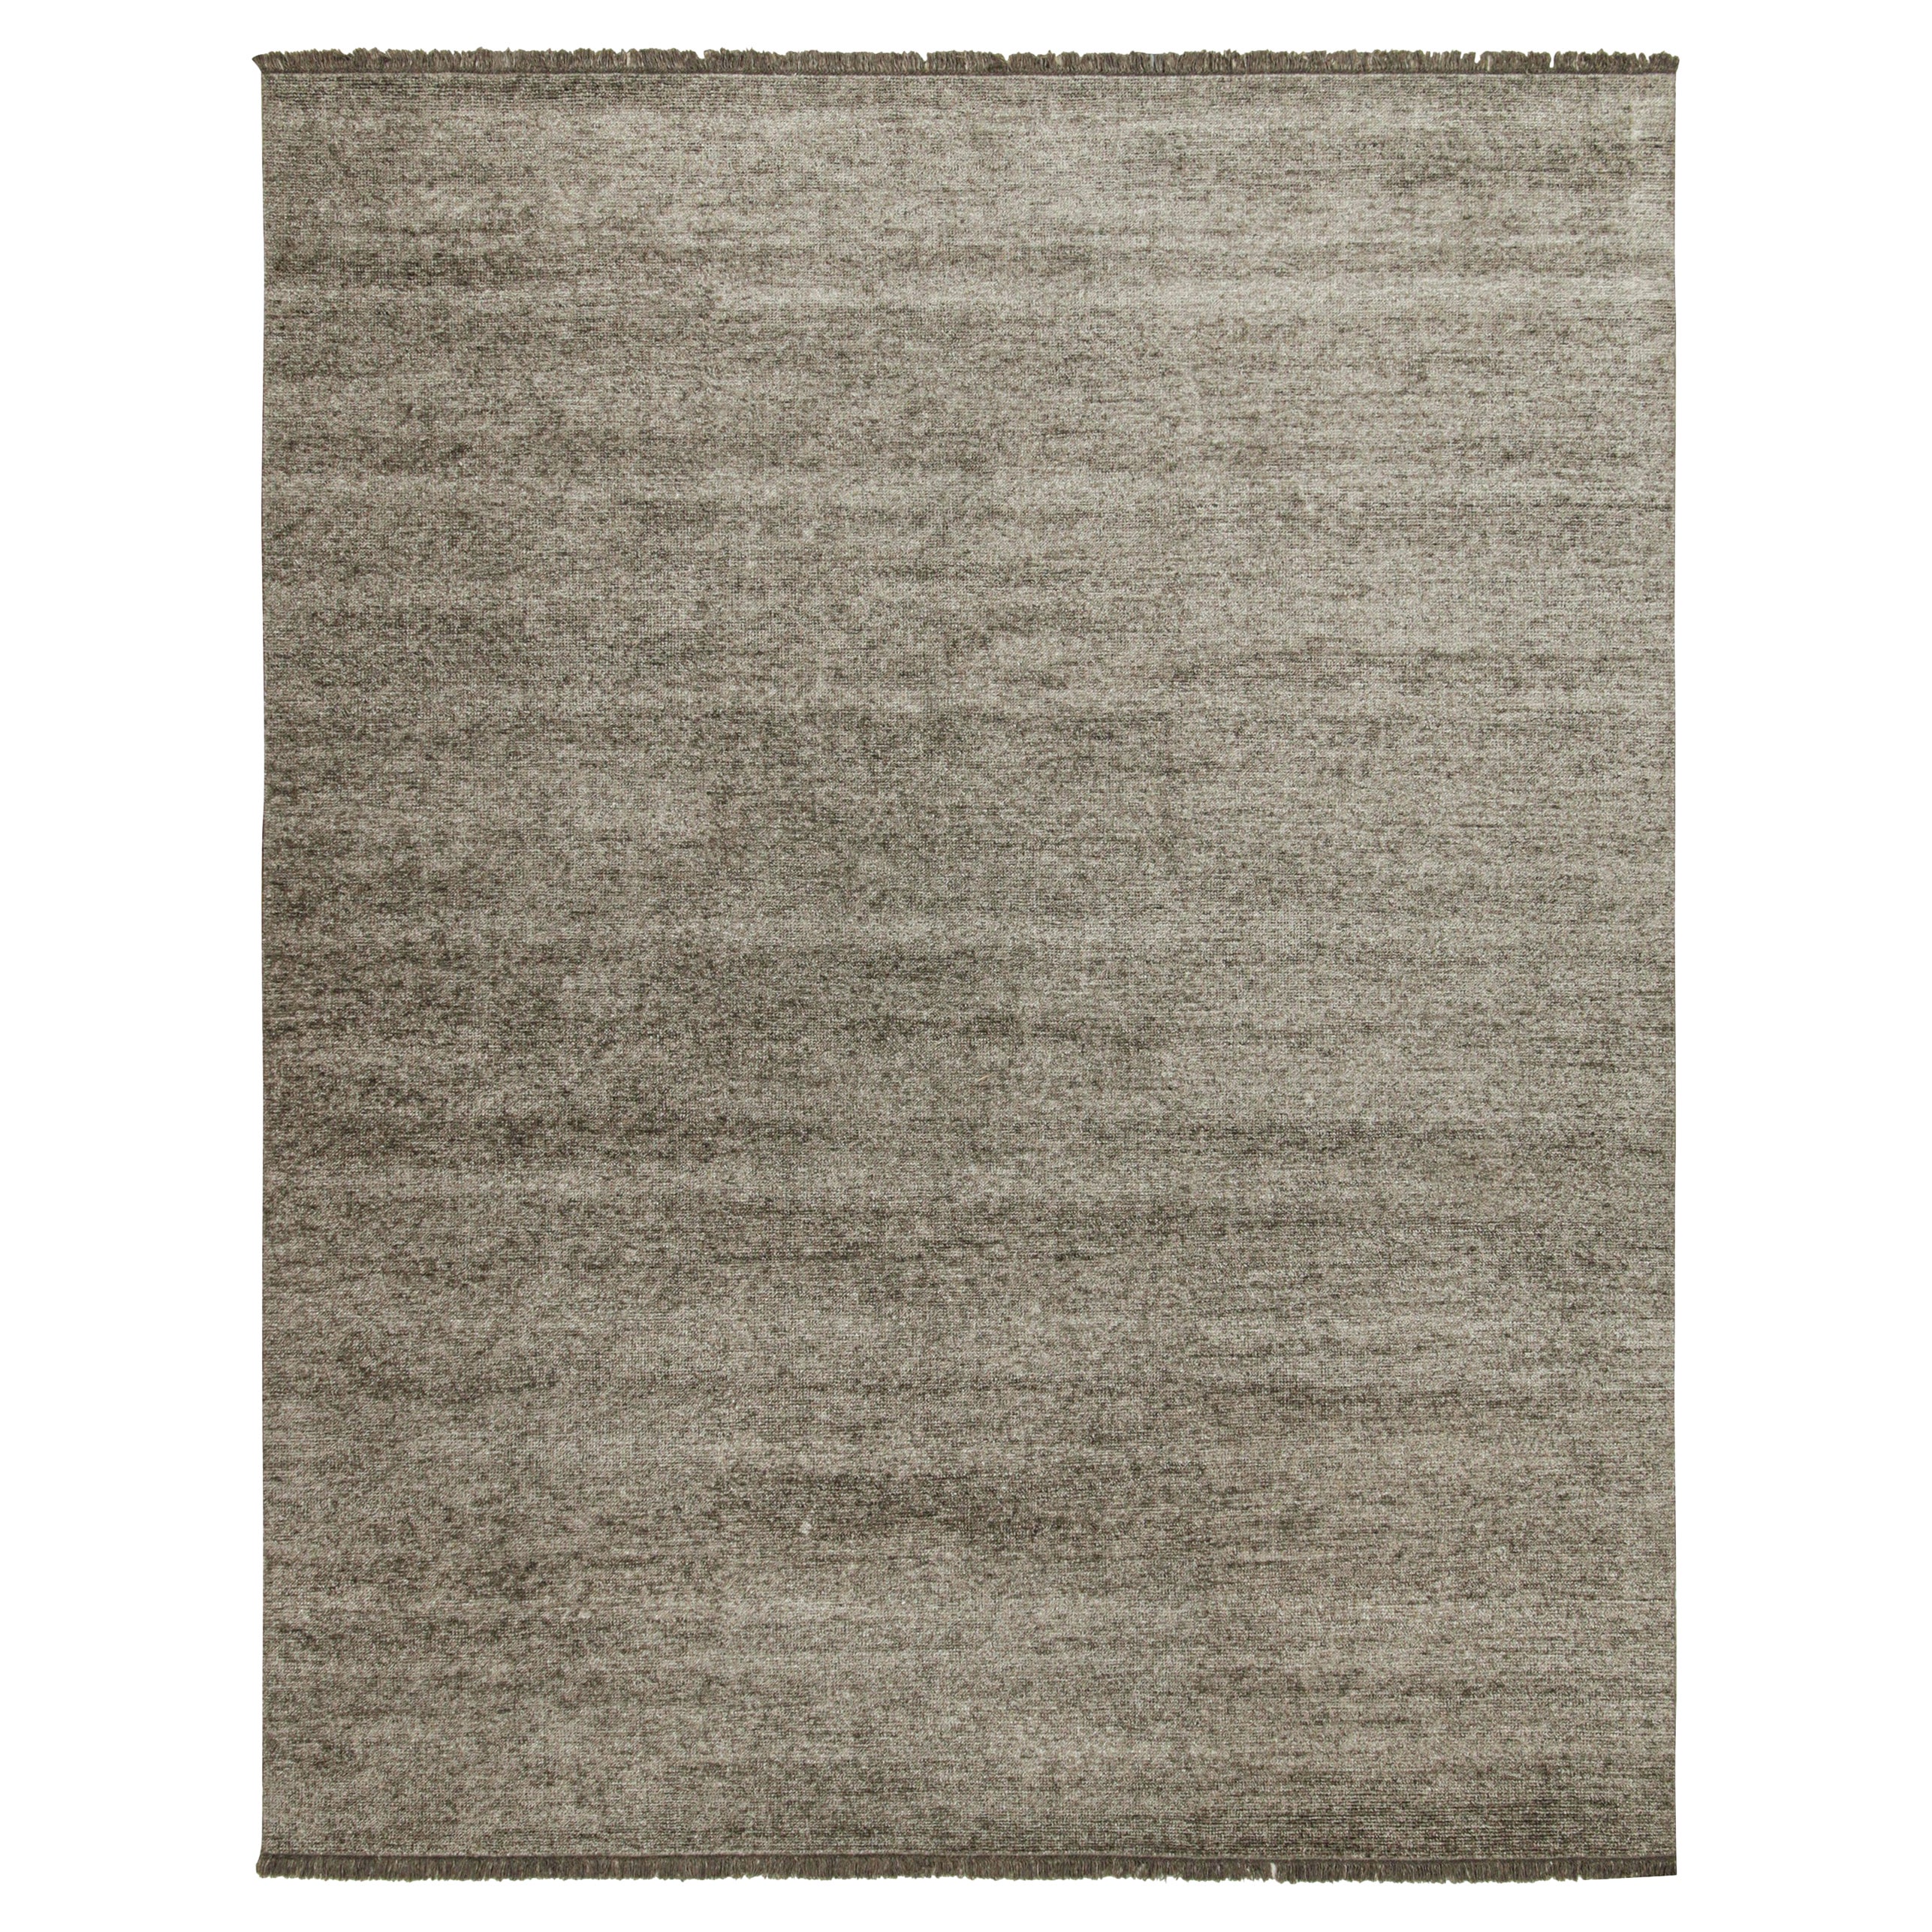 Rug & Kilim’s Modern rug in Solid Silver-Gray Tone-on-Tone Striae For Sale